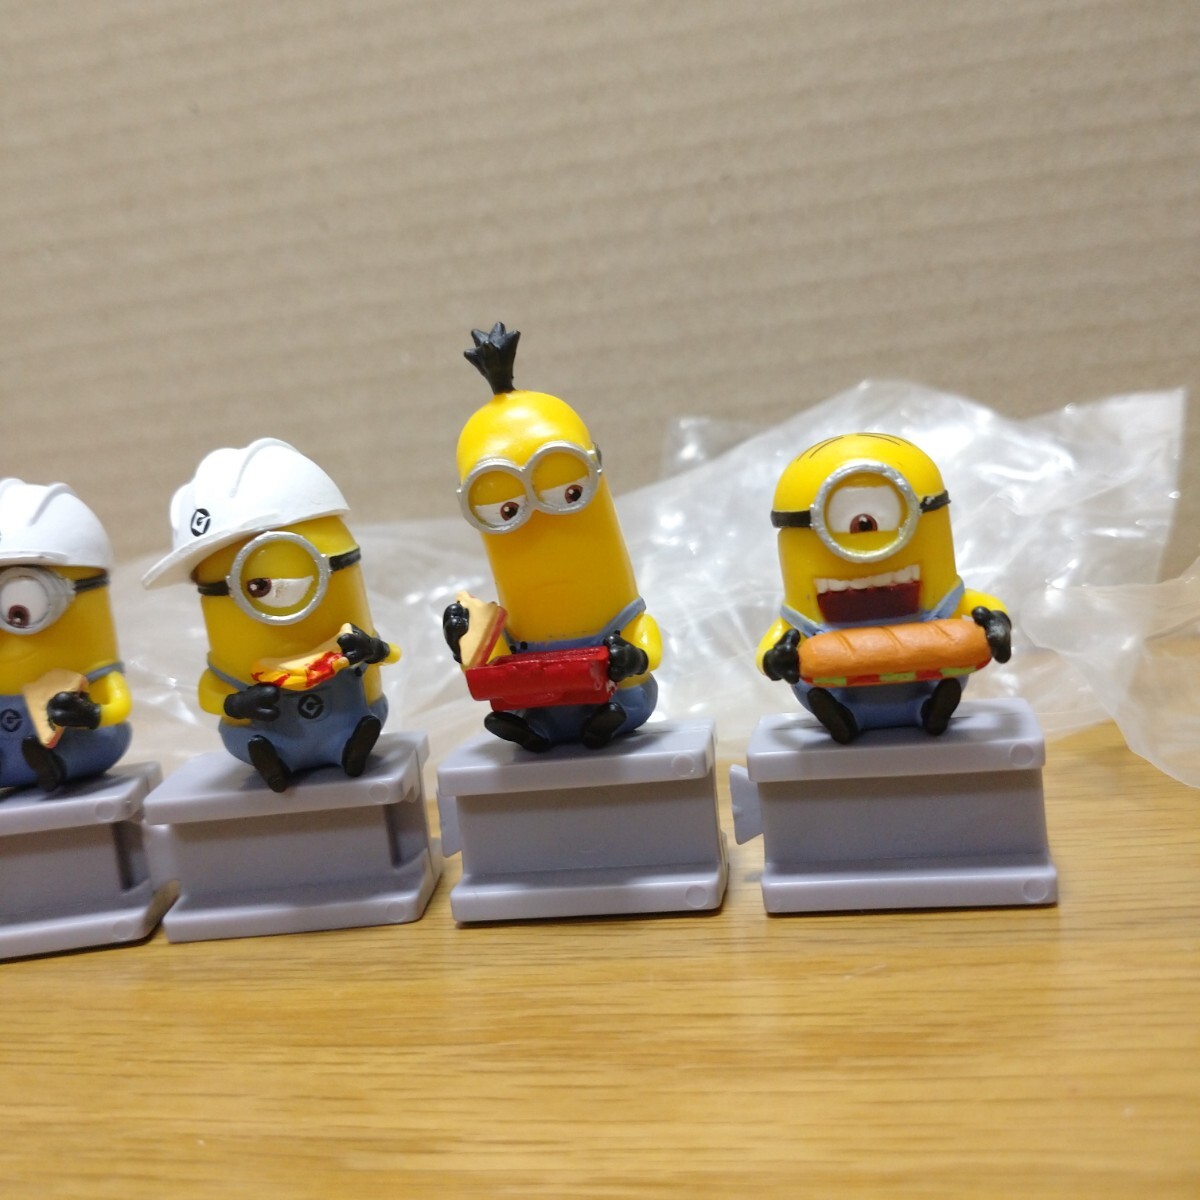 minions minion 工事現場 工事 工場 作業員 フィギュア コレクション ミニオンズ ミニオン パン ご飯 collection toy lunch time figureの画像2